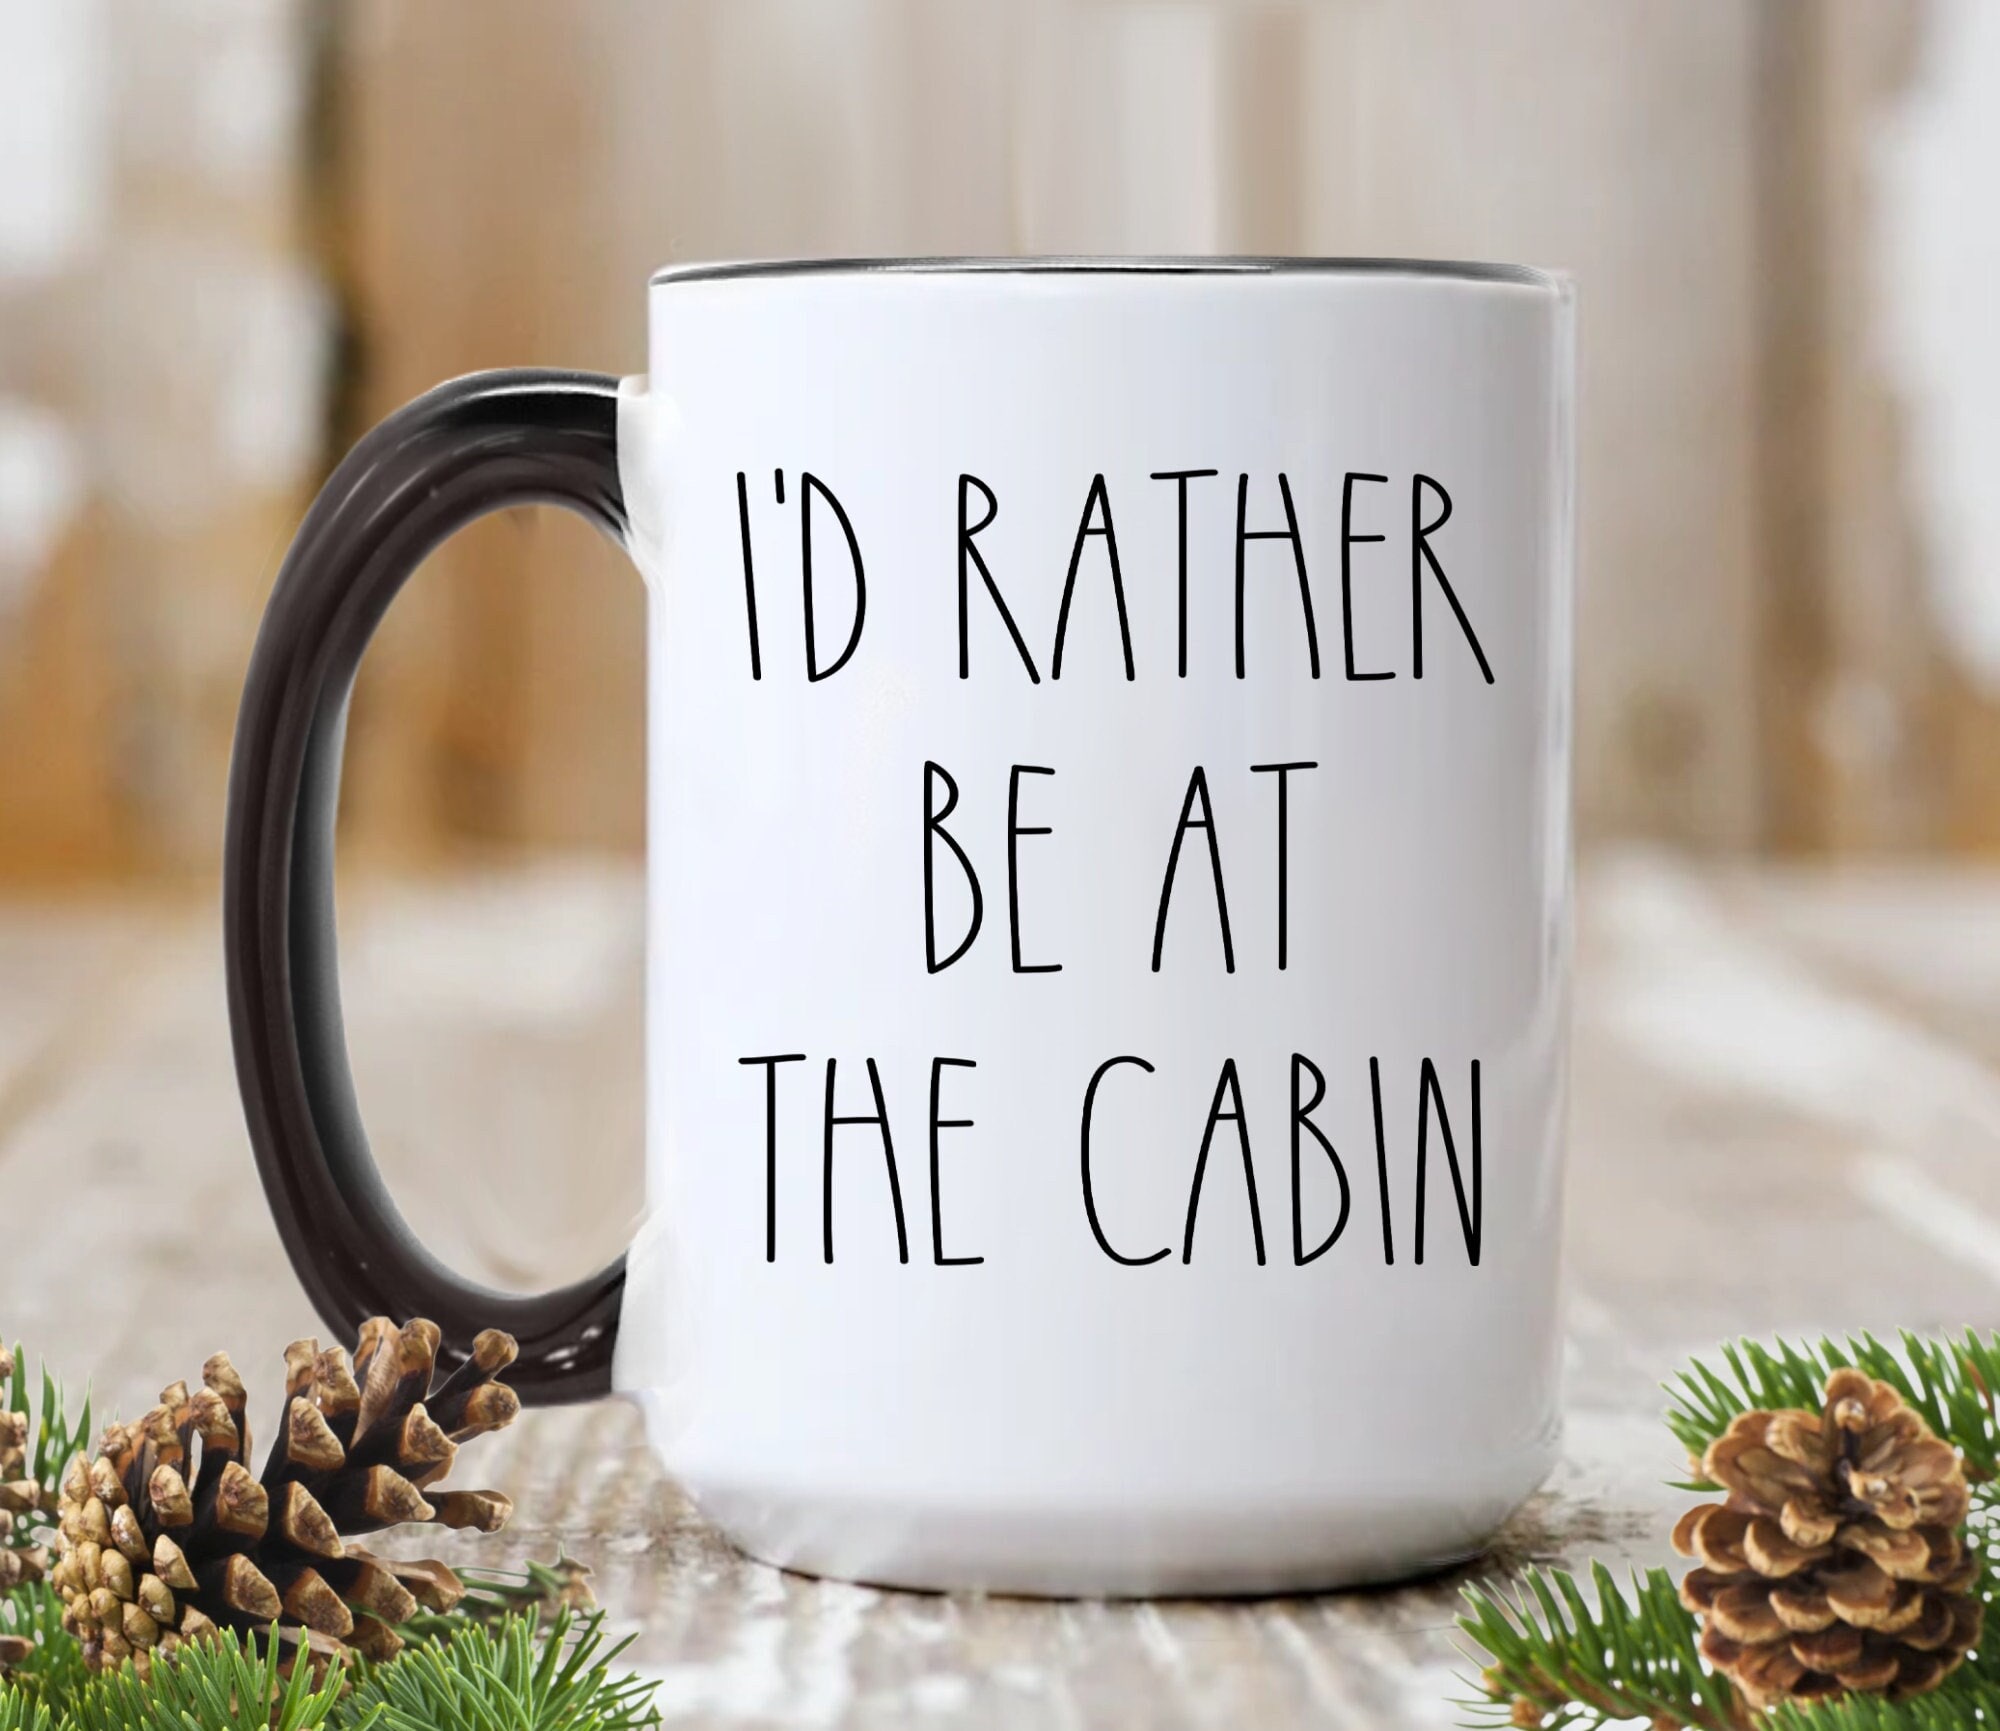 Cabin in the Woods Coffee Mug Coffee Cup 15oz with Beautiful Vibrant Colors  | Mugs Dishwasher & Microwave Safe